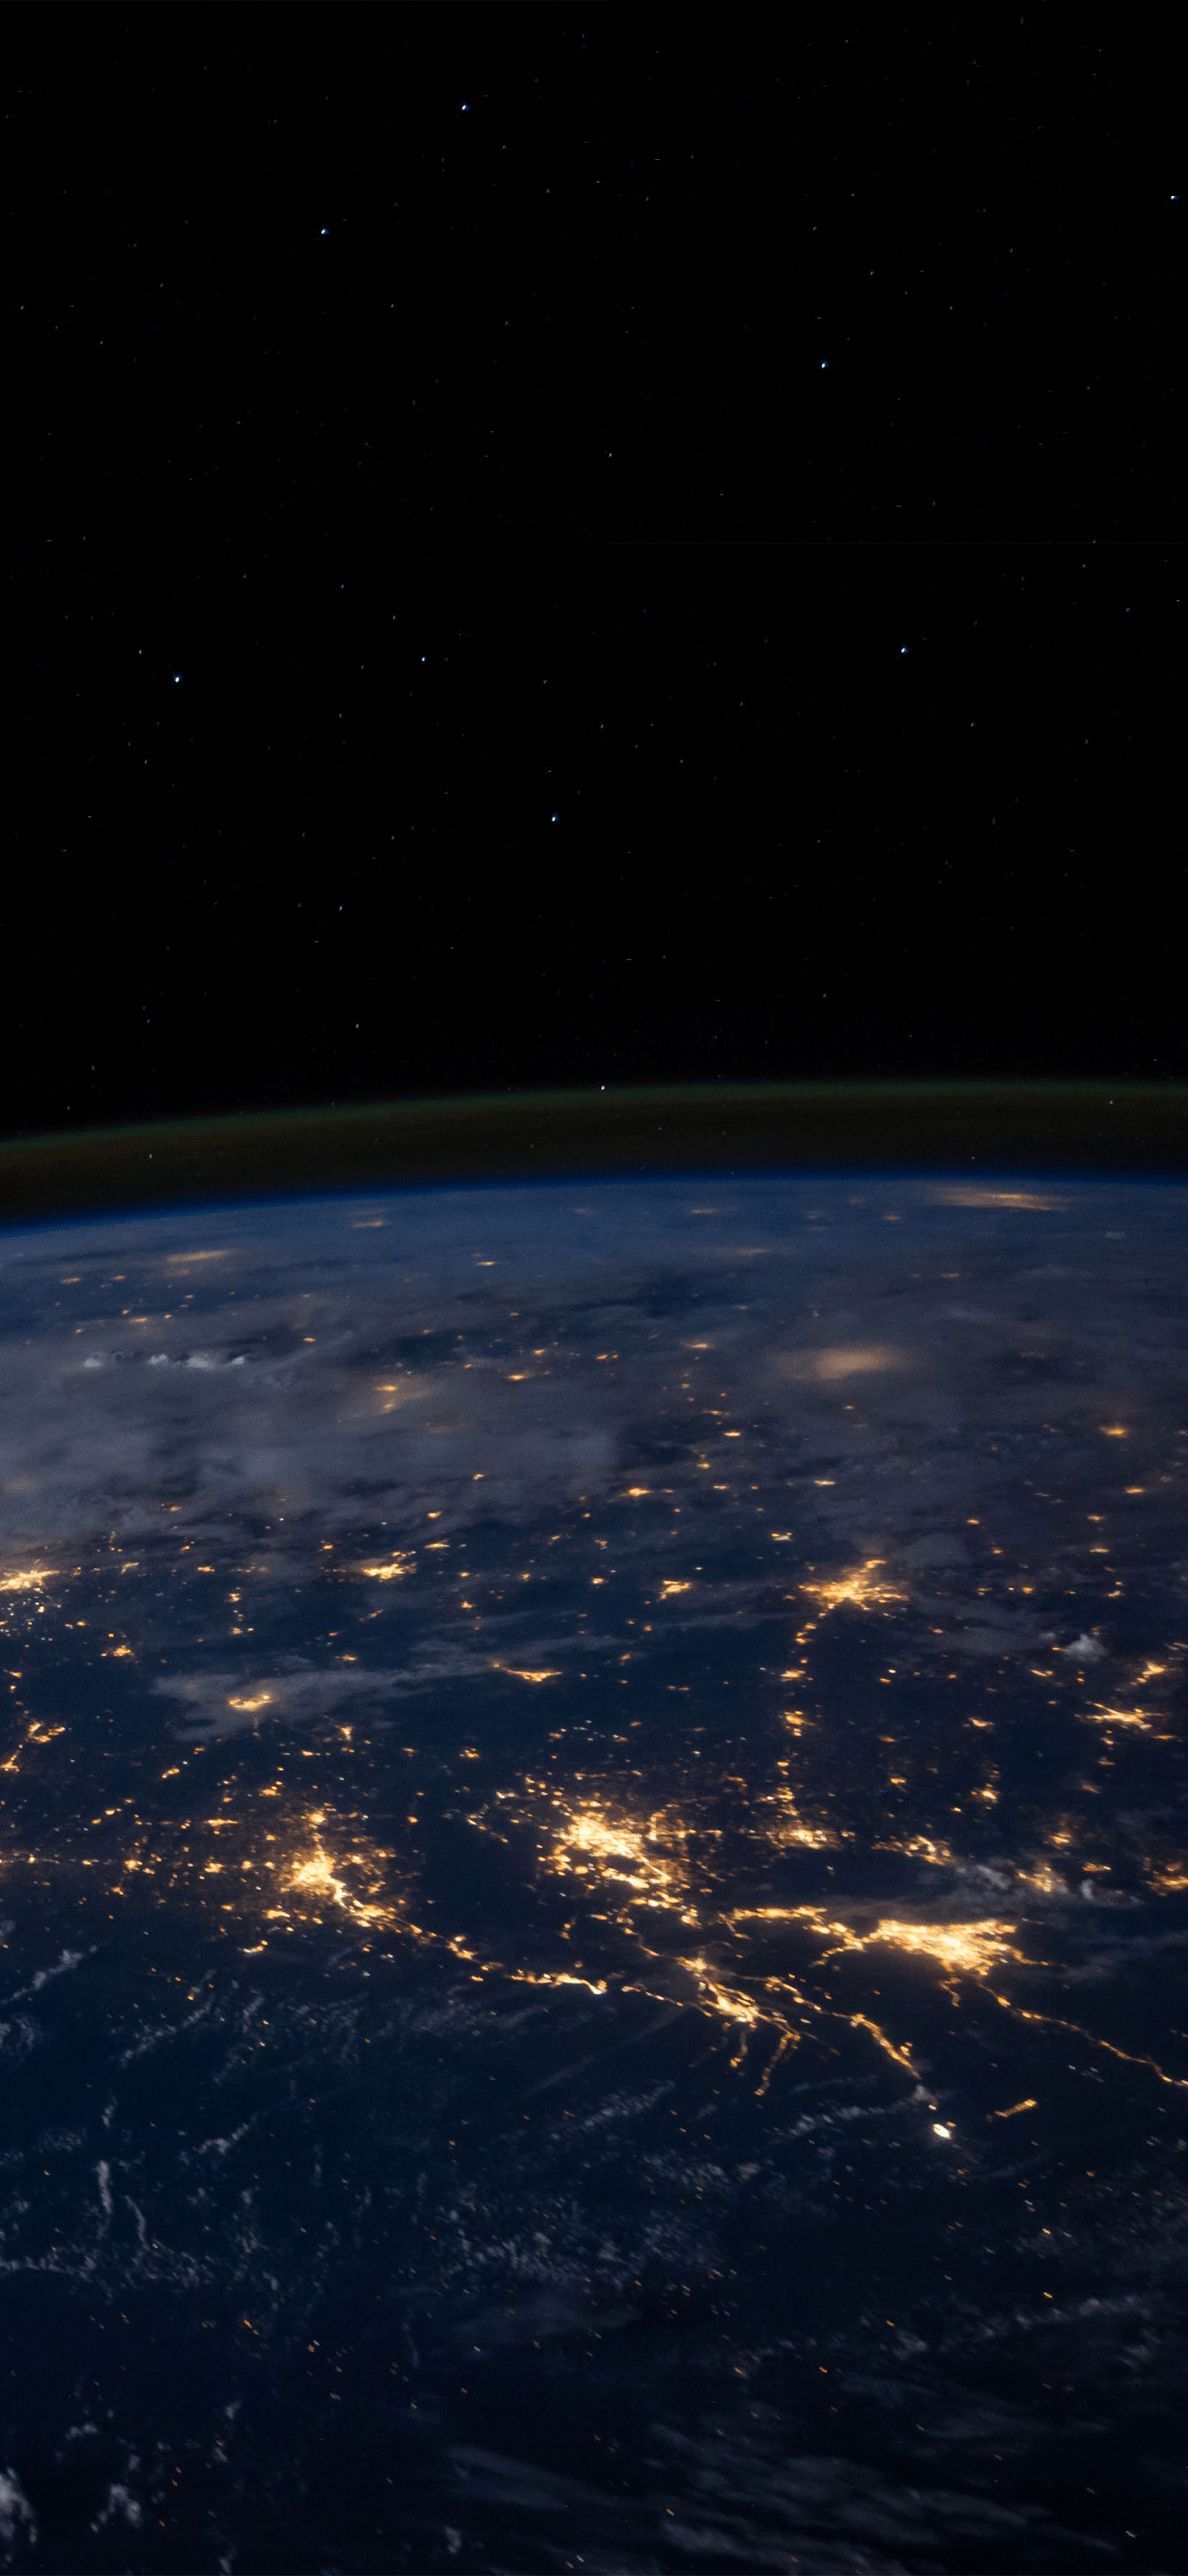 A view of the earth from space - Planet